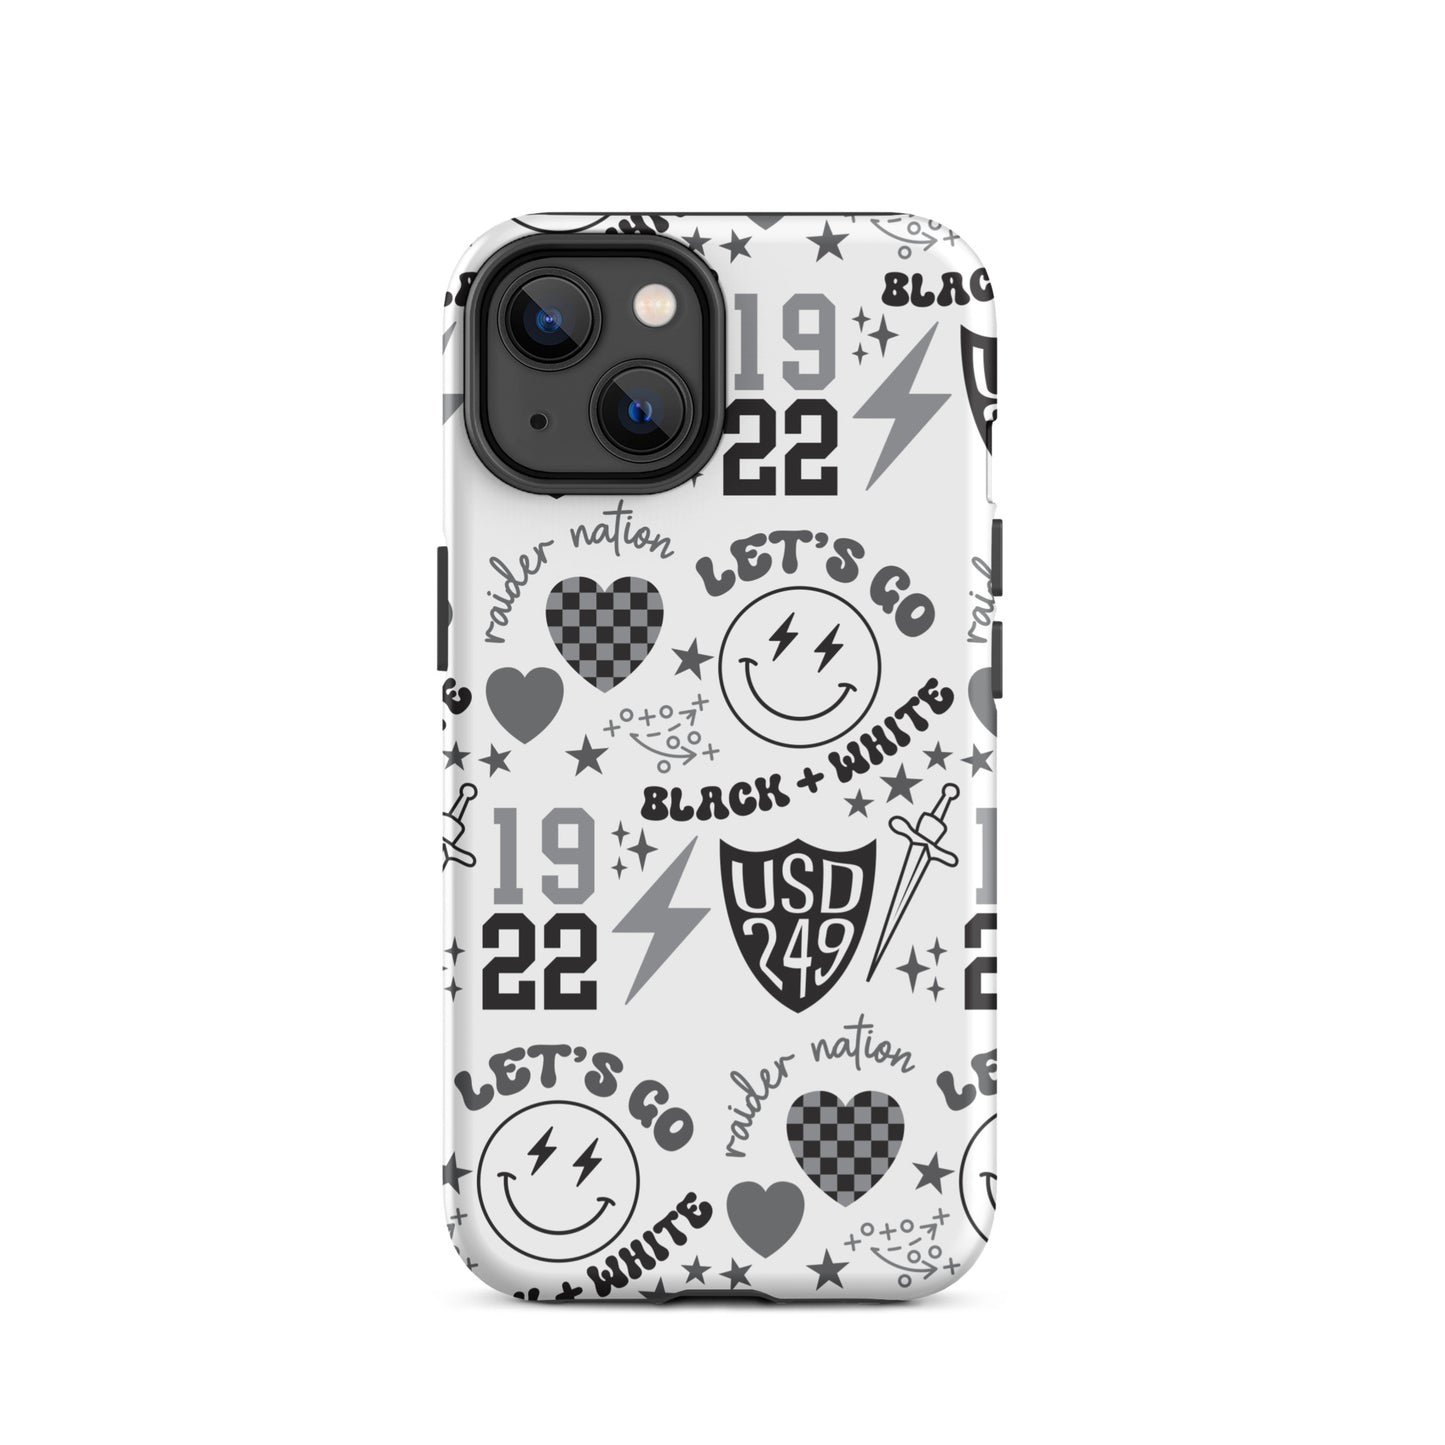 Raiders Game Day iPhone Case